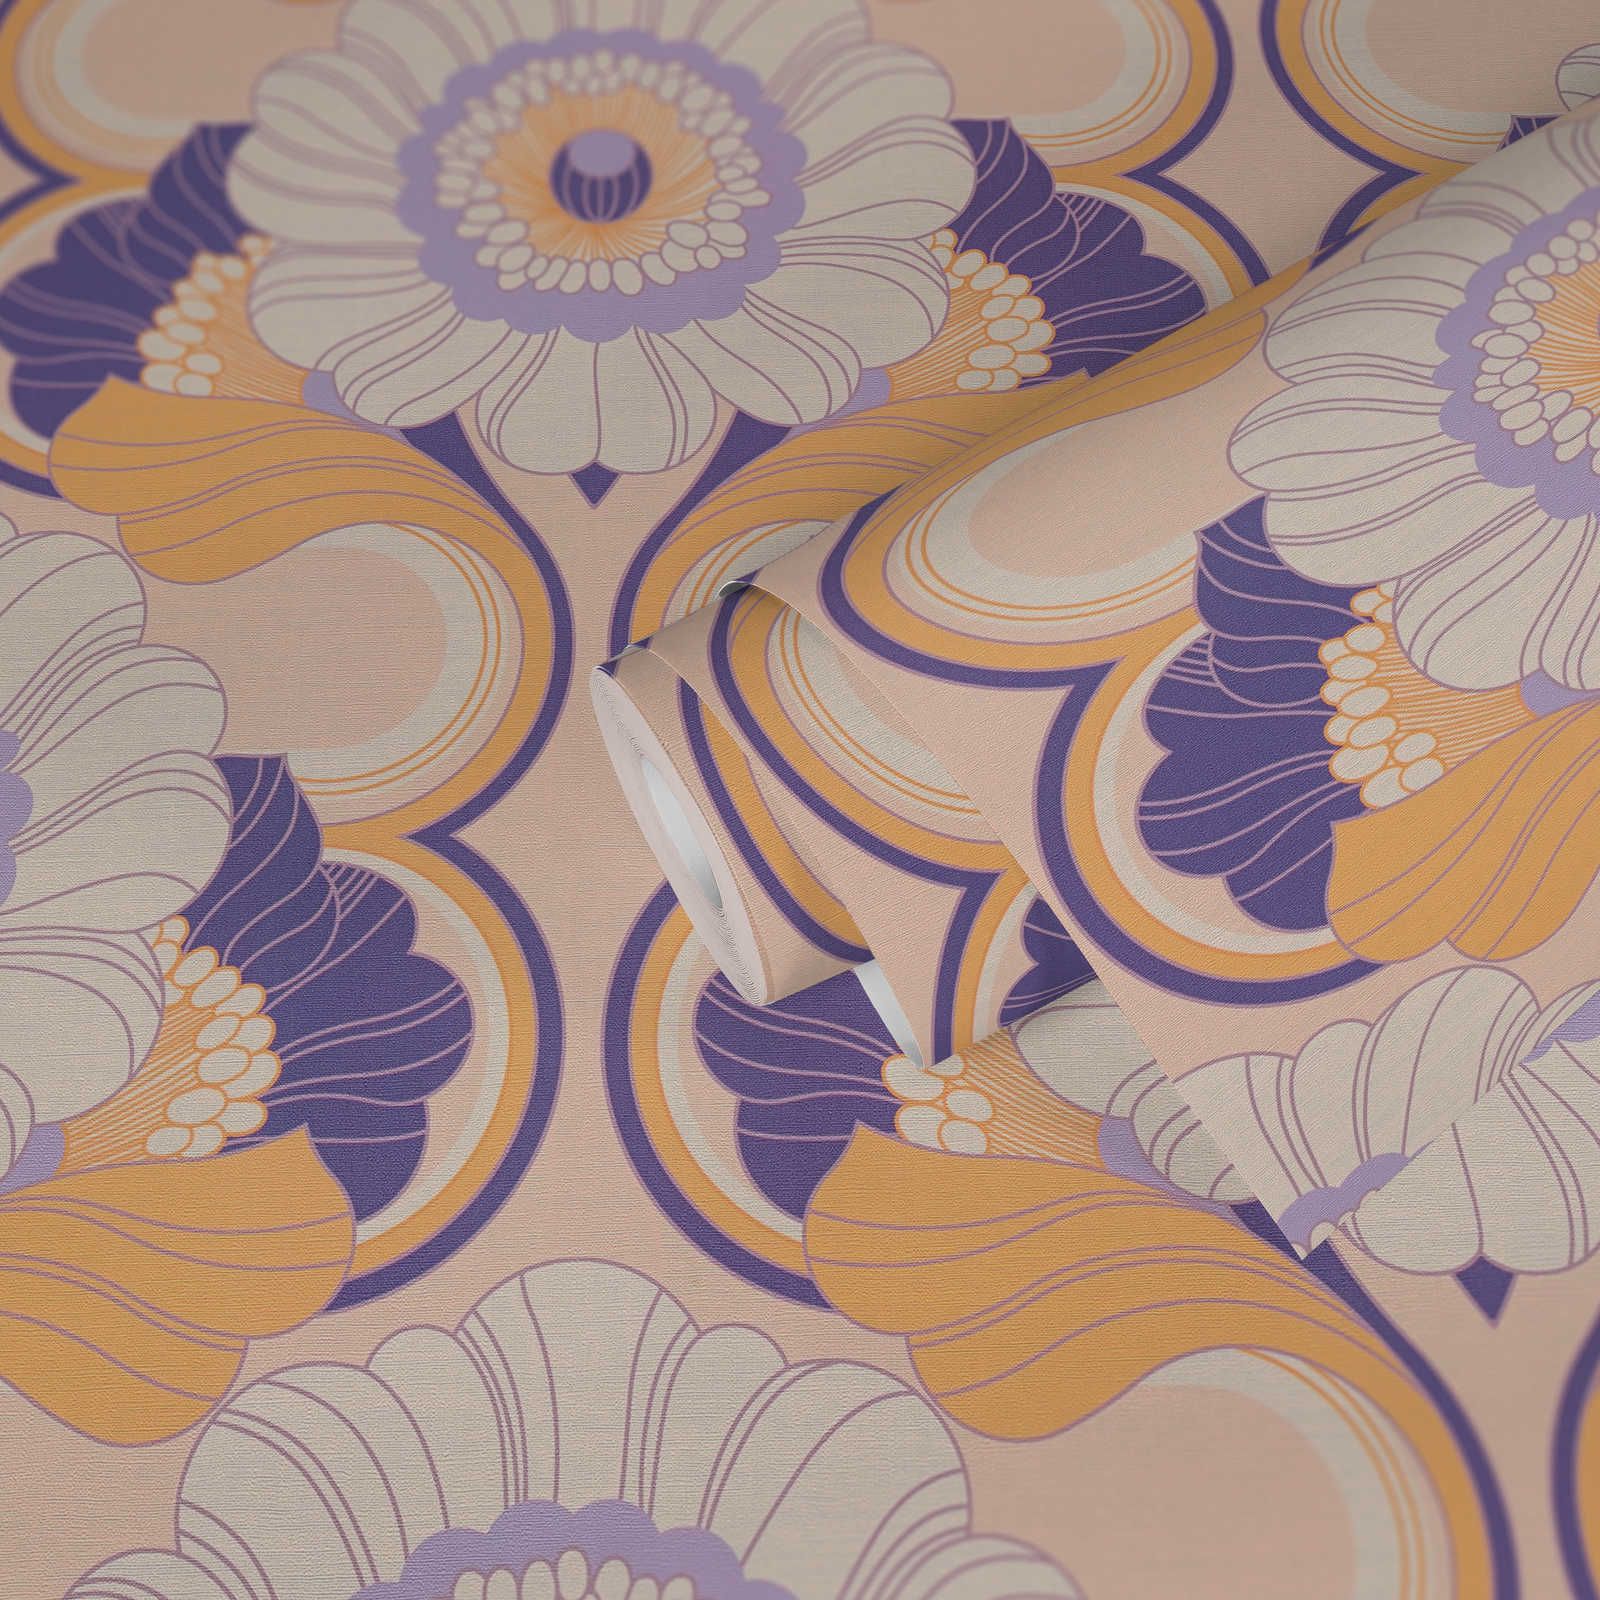             Retro wallpaper with floral pattern - beige, yellow, purple
        